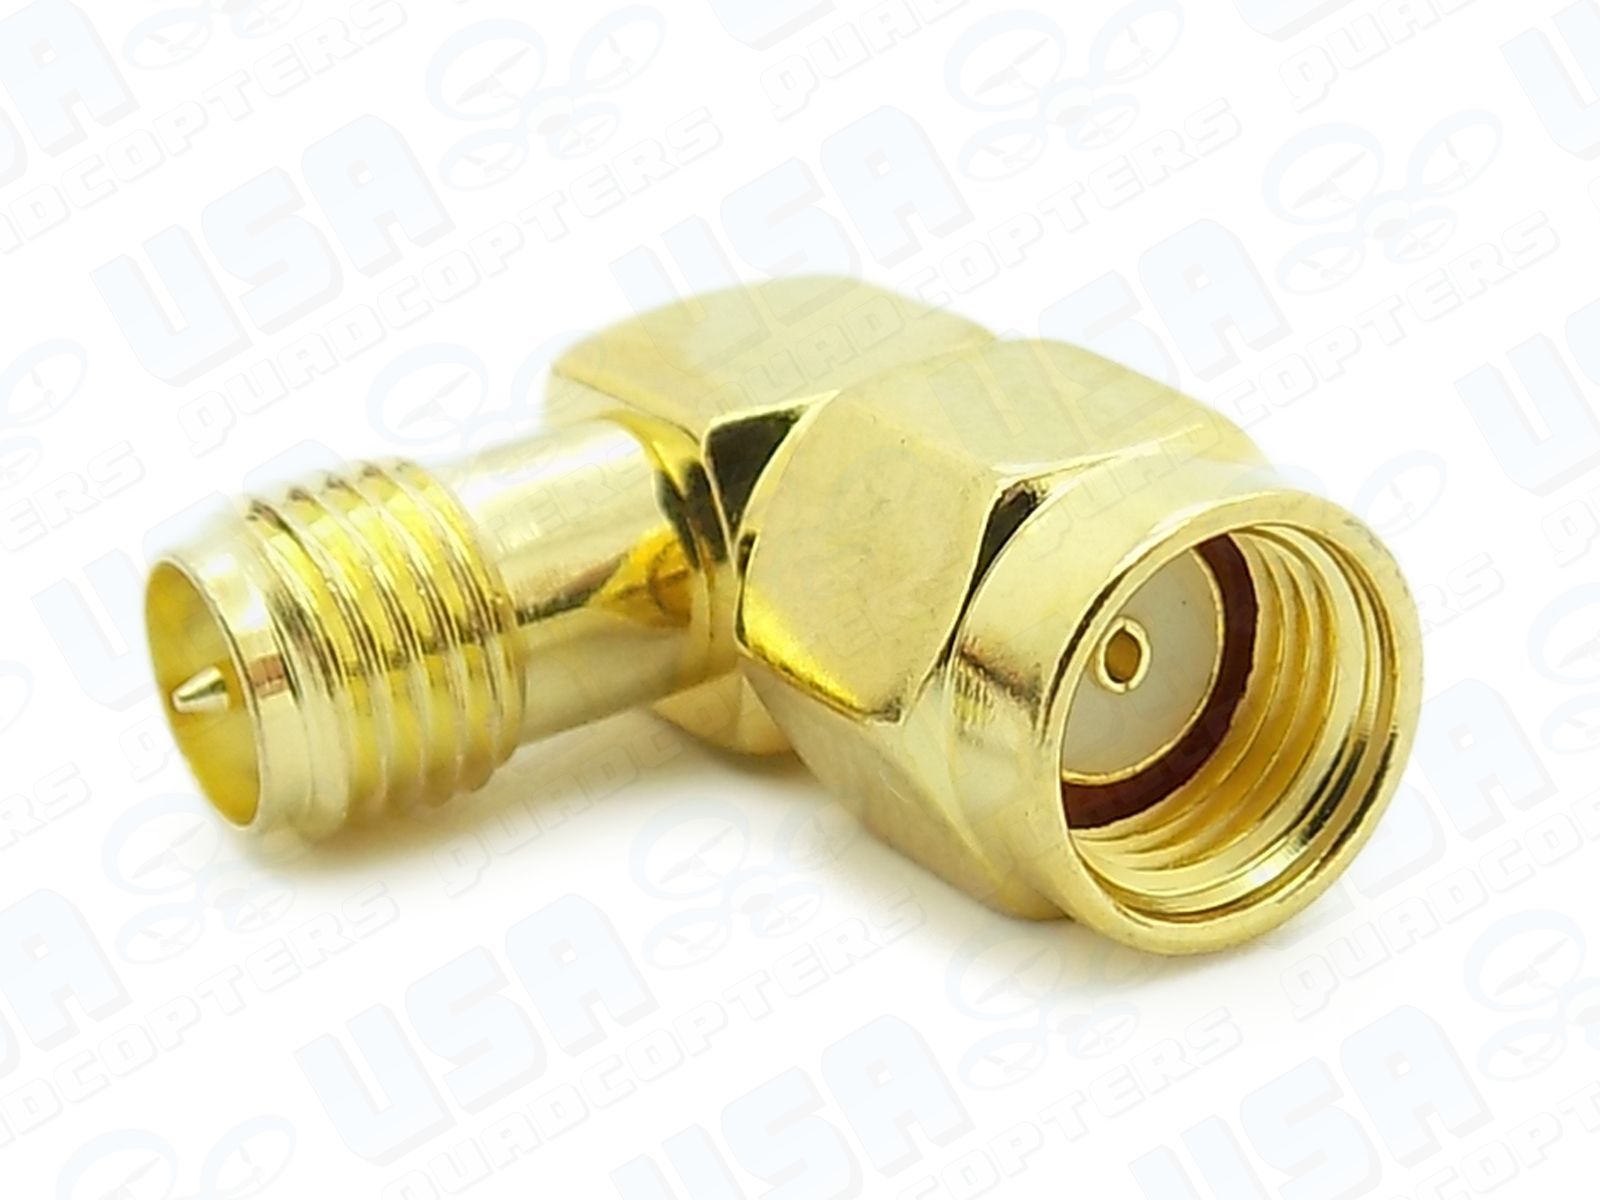 RP-SMA Male to RP-SMA Female Coaxial Gold Plated Adapter for 5.8gHz Systems